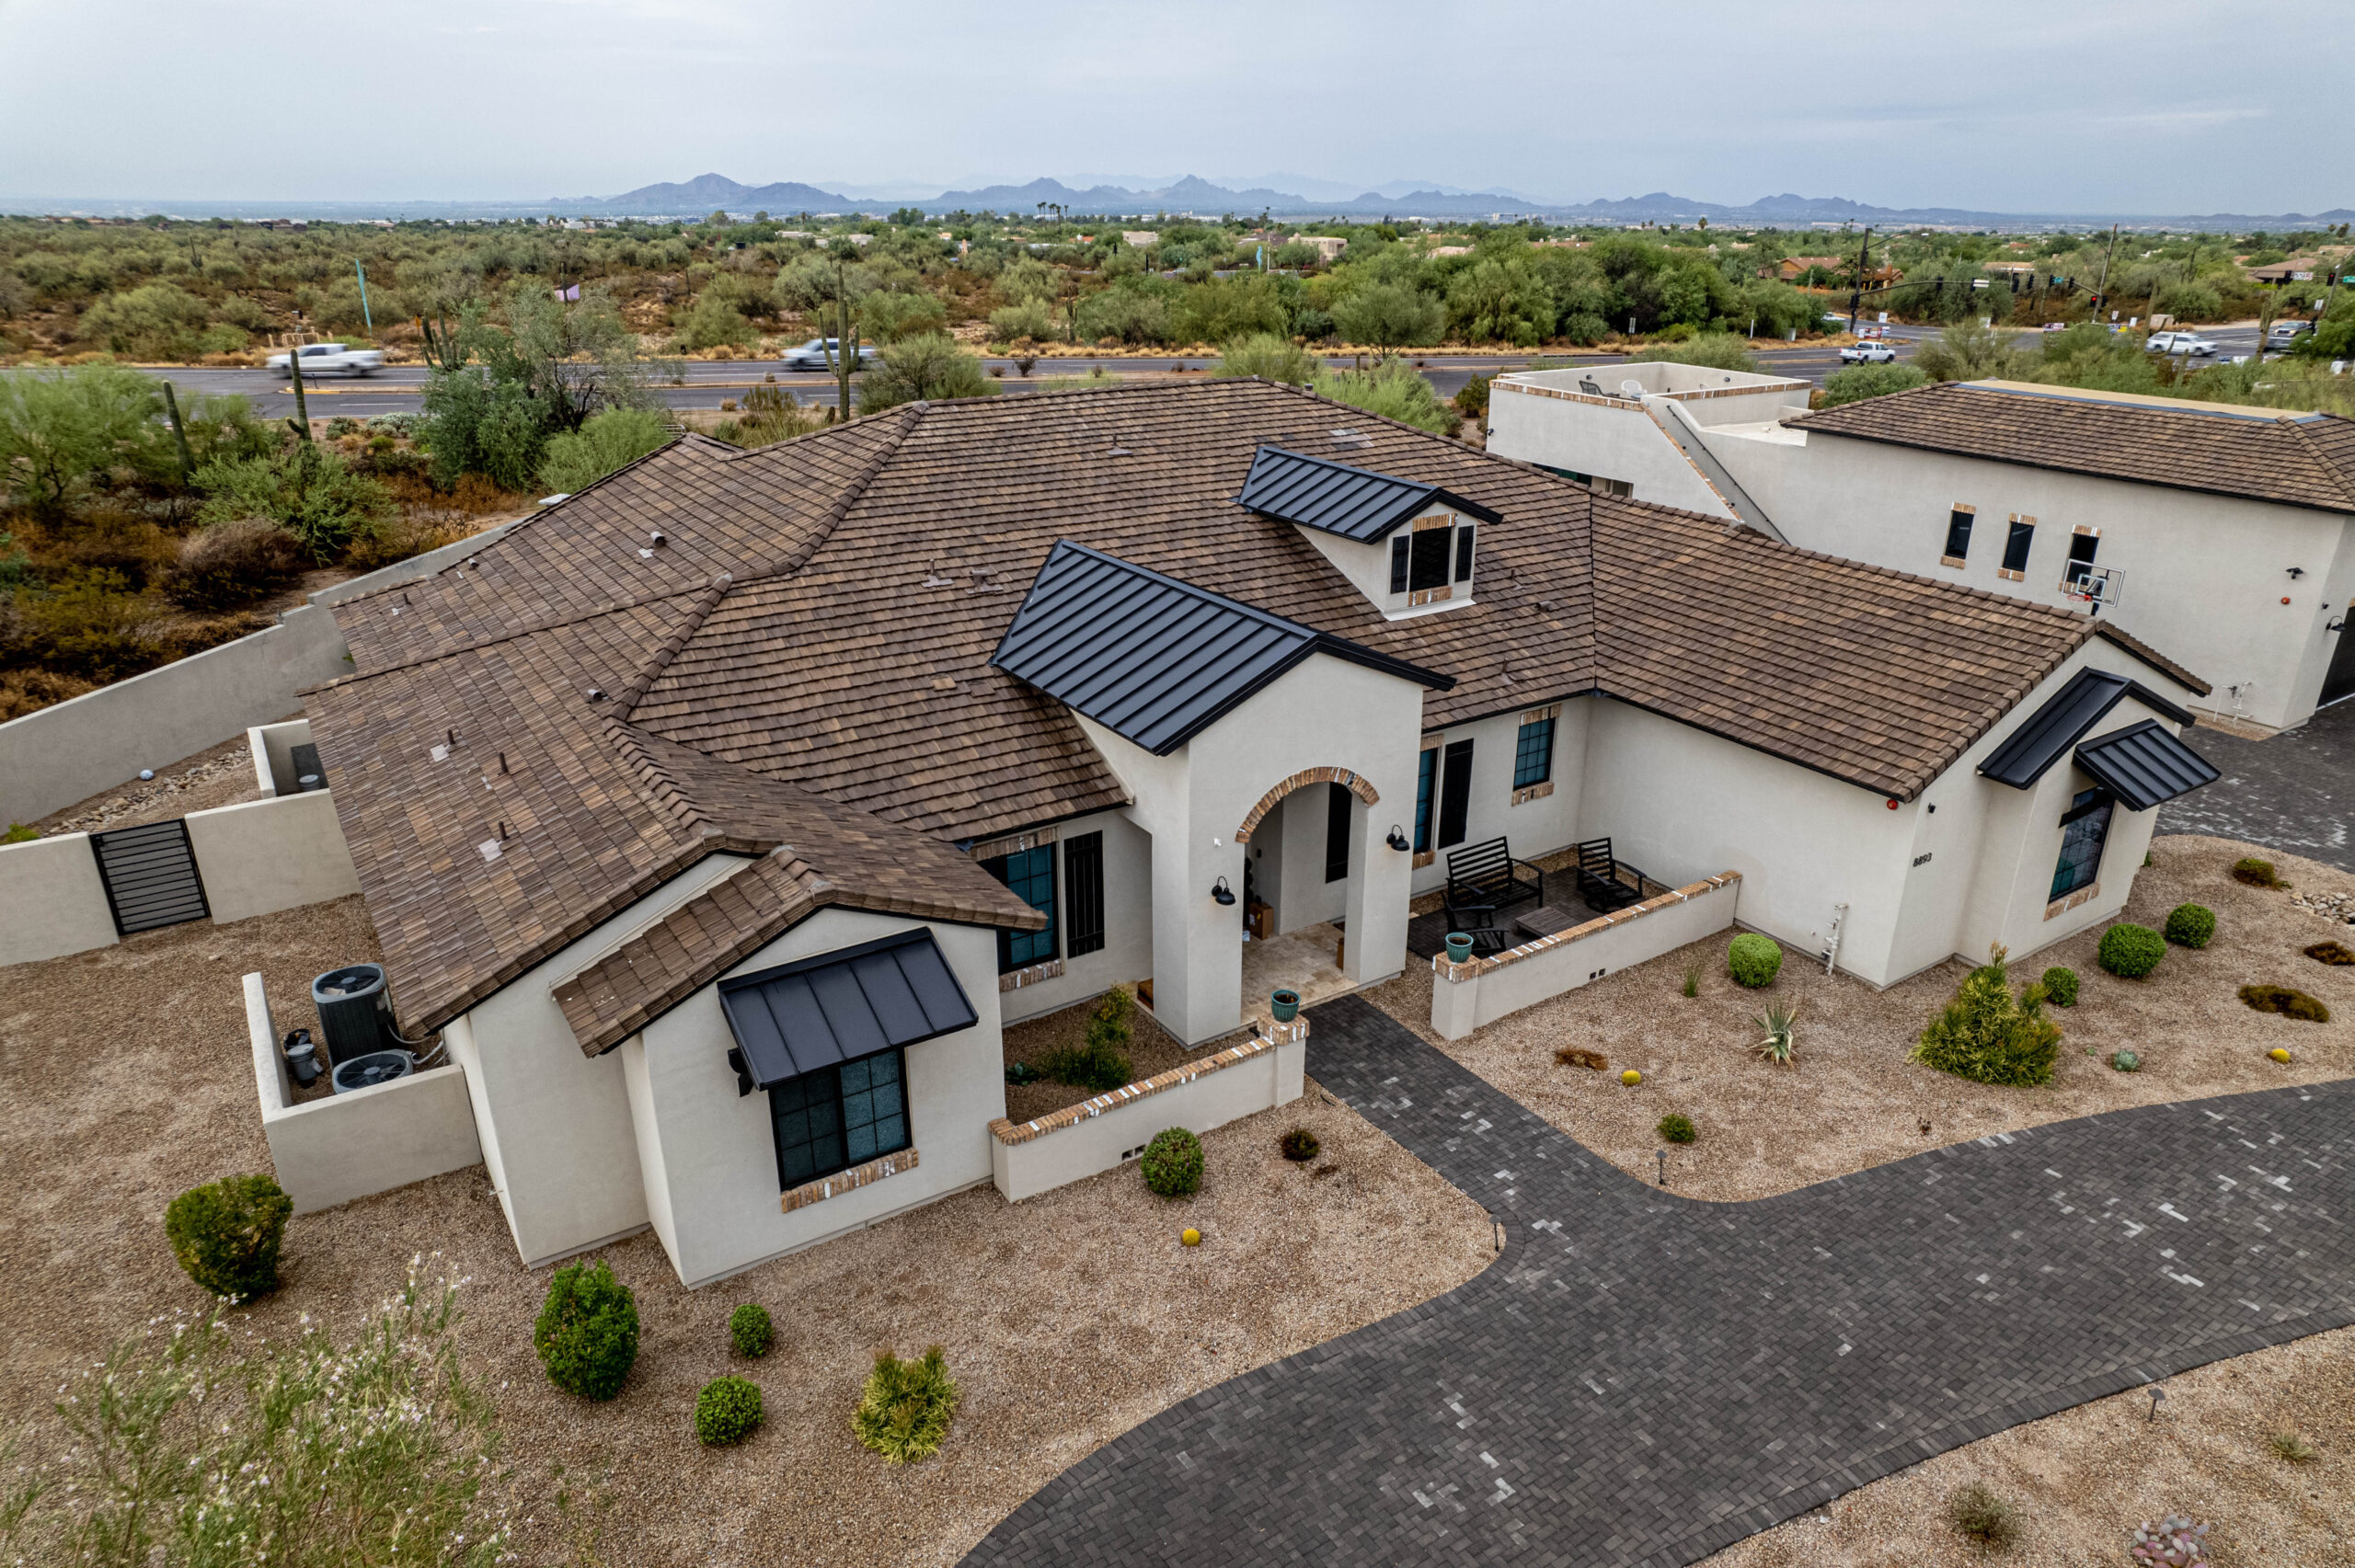 Bird's-eye view of a recently completed tile roof in Silverleaf.